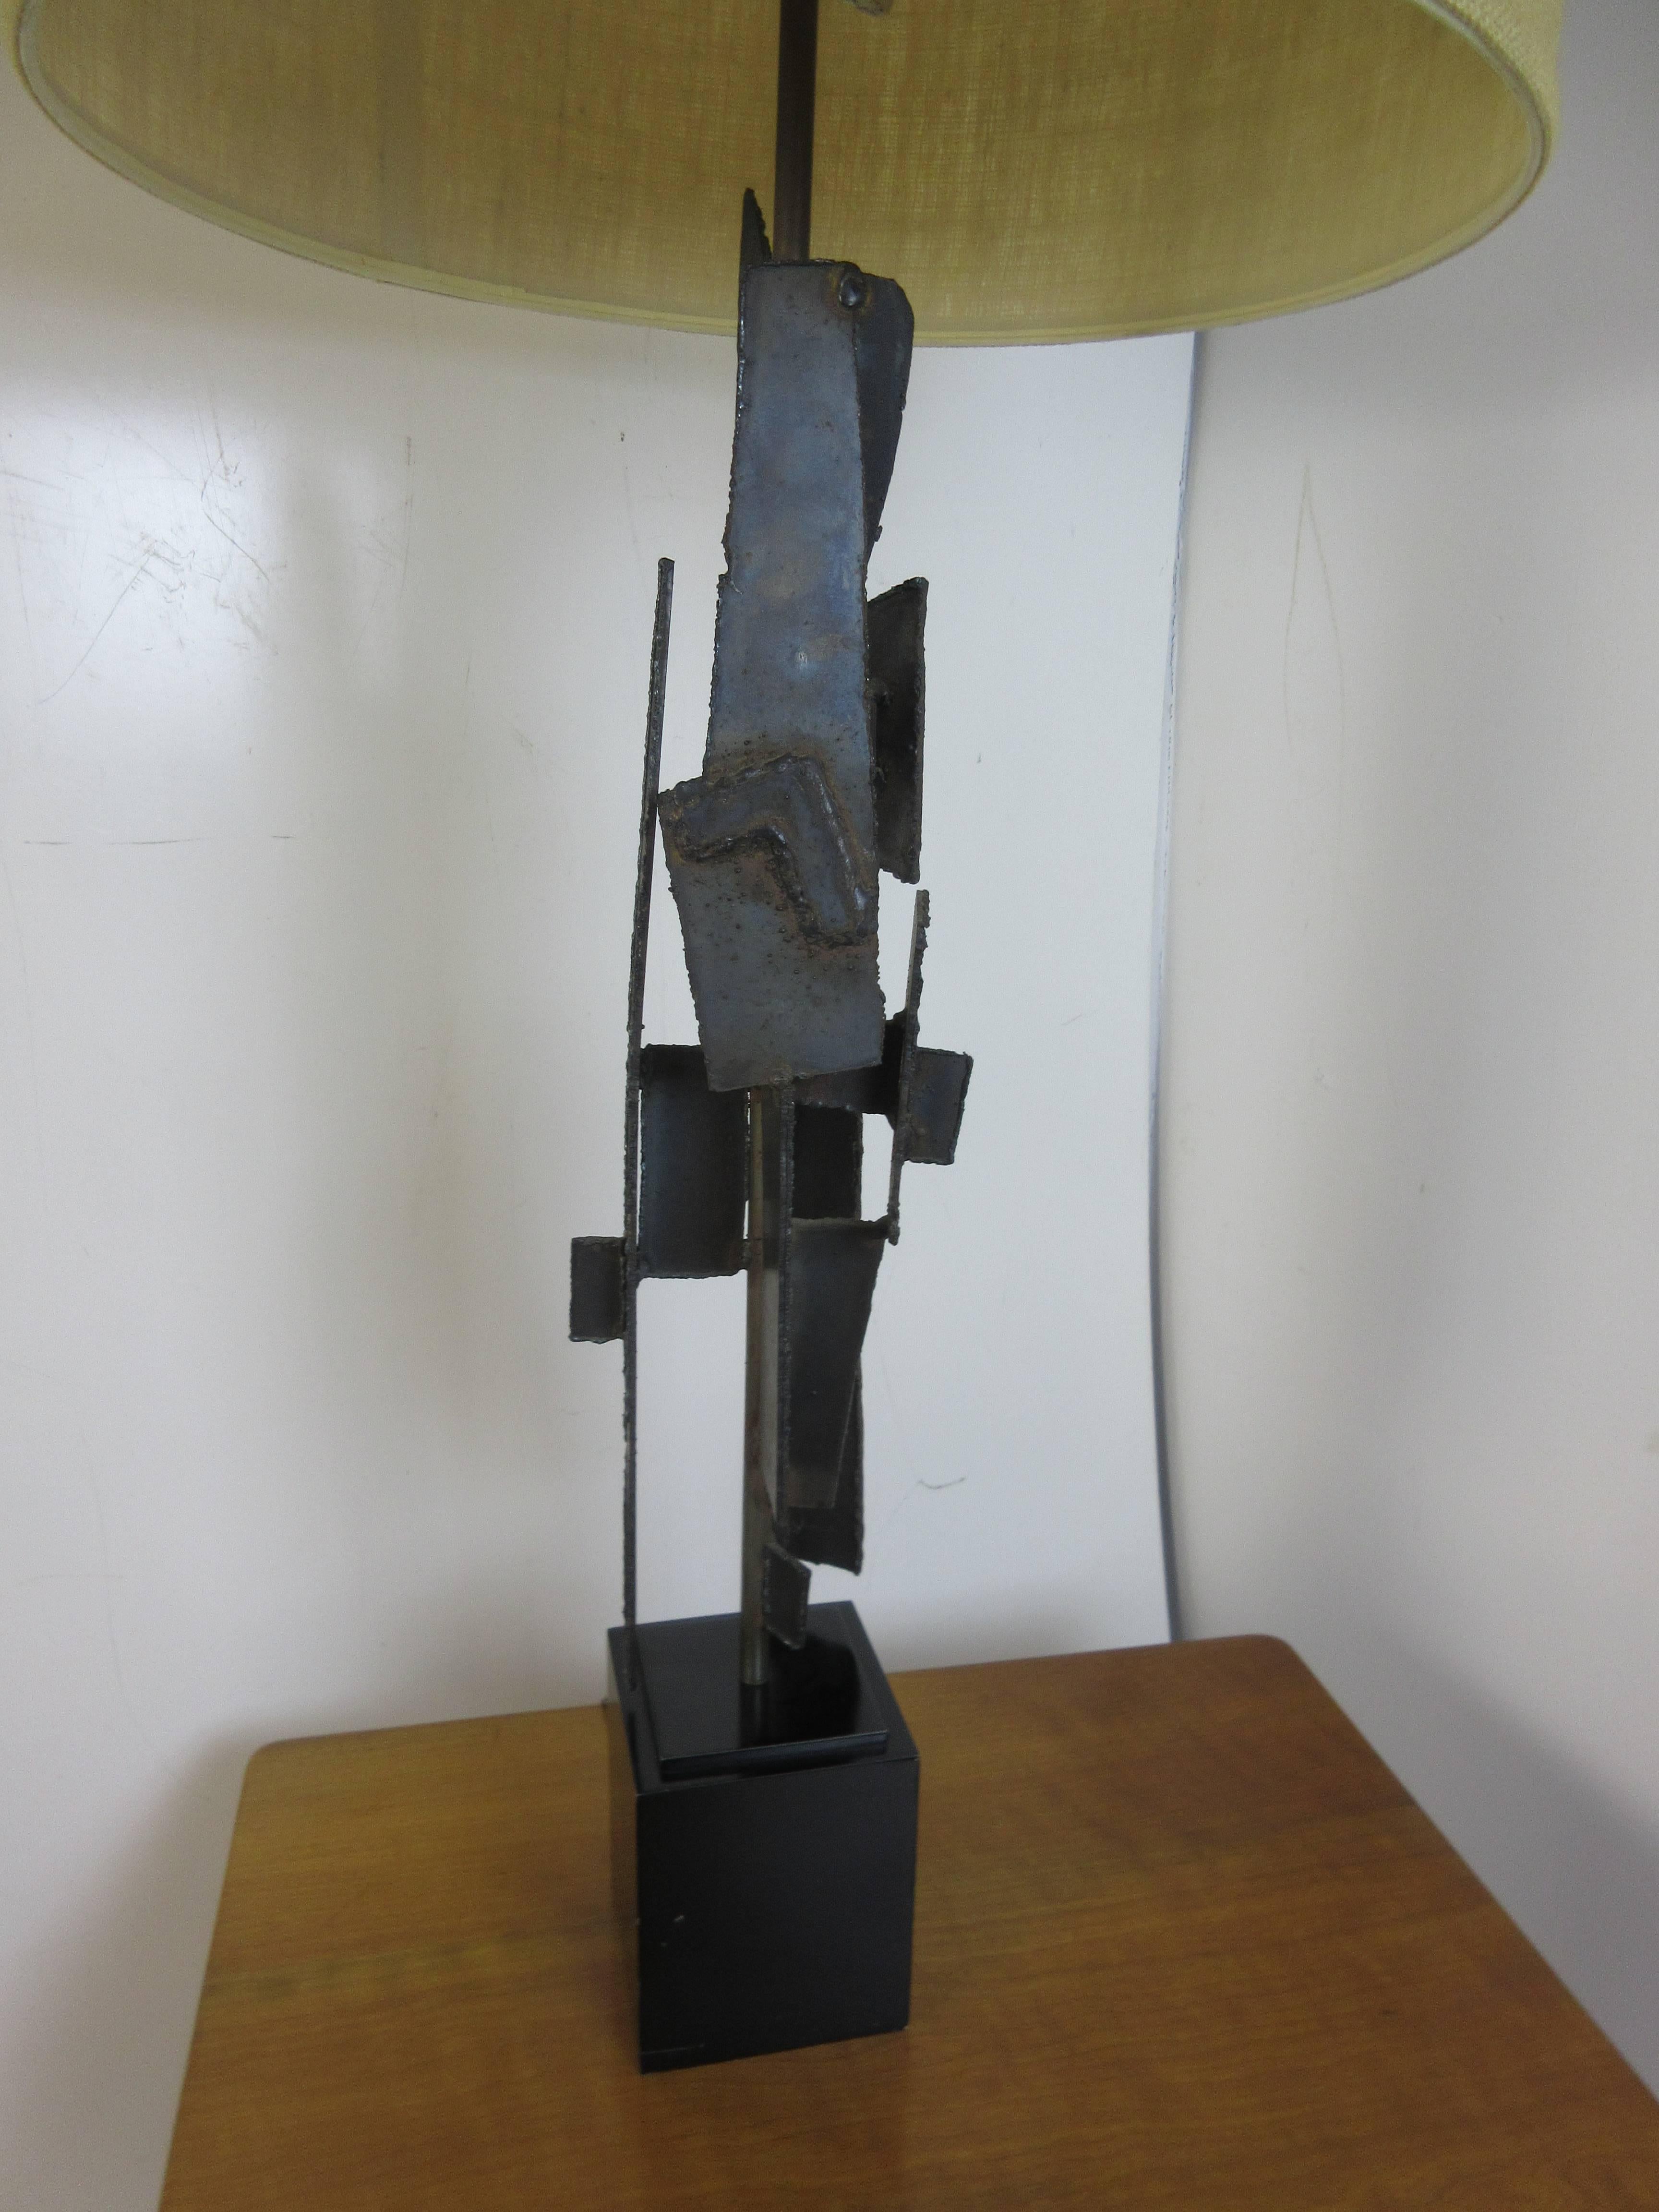 Brutalist Laurel lamp by Harry Balmer in burnished metal. Lamp is show with a shade but that is not included. Trapezoid finial of black acrylic accentuates the welded metal shapes on the lamp. Lamp retains remnant of Laurel Lamp Company decal.